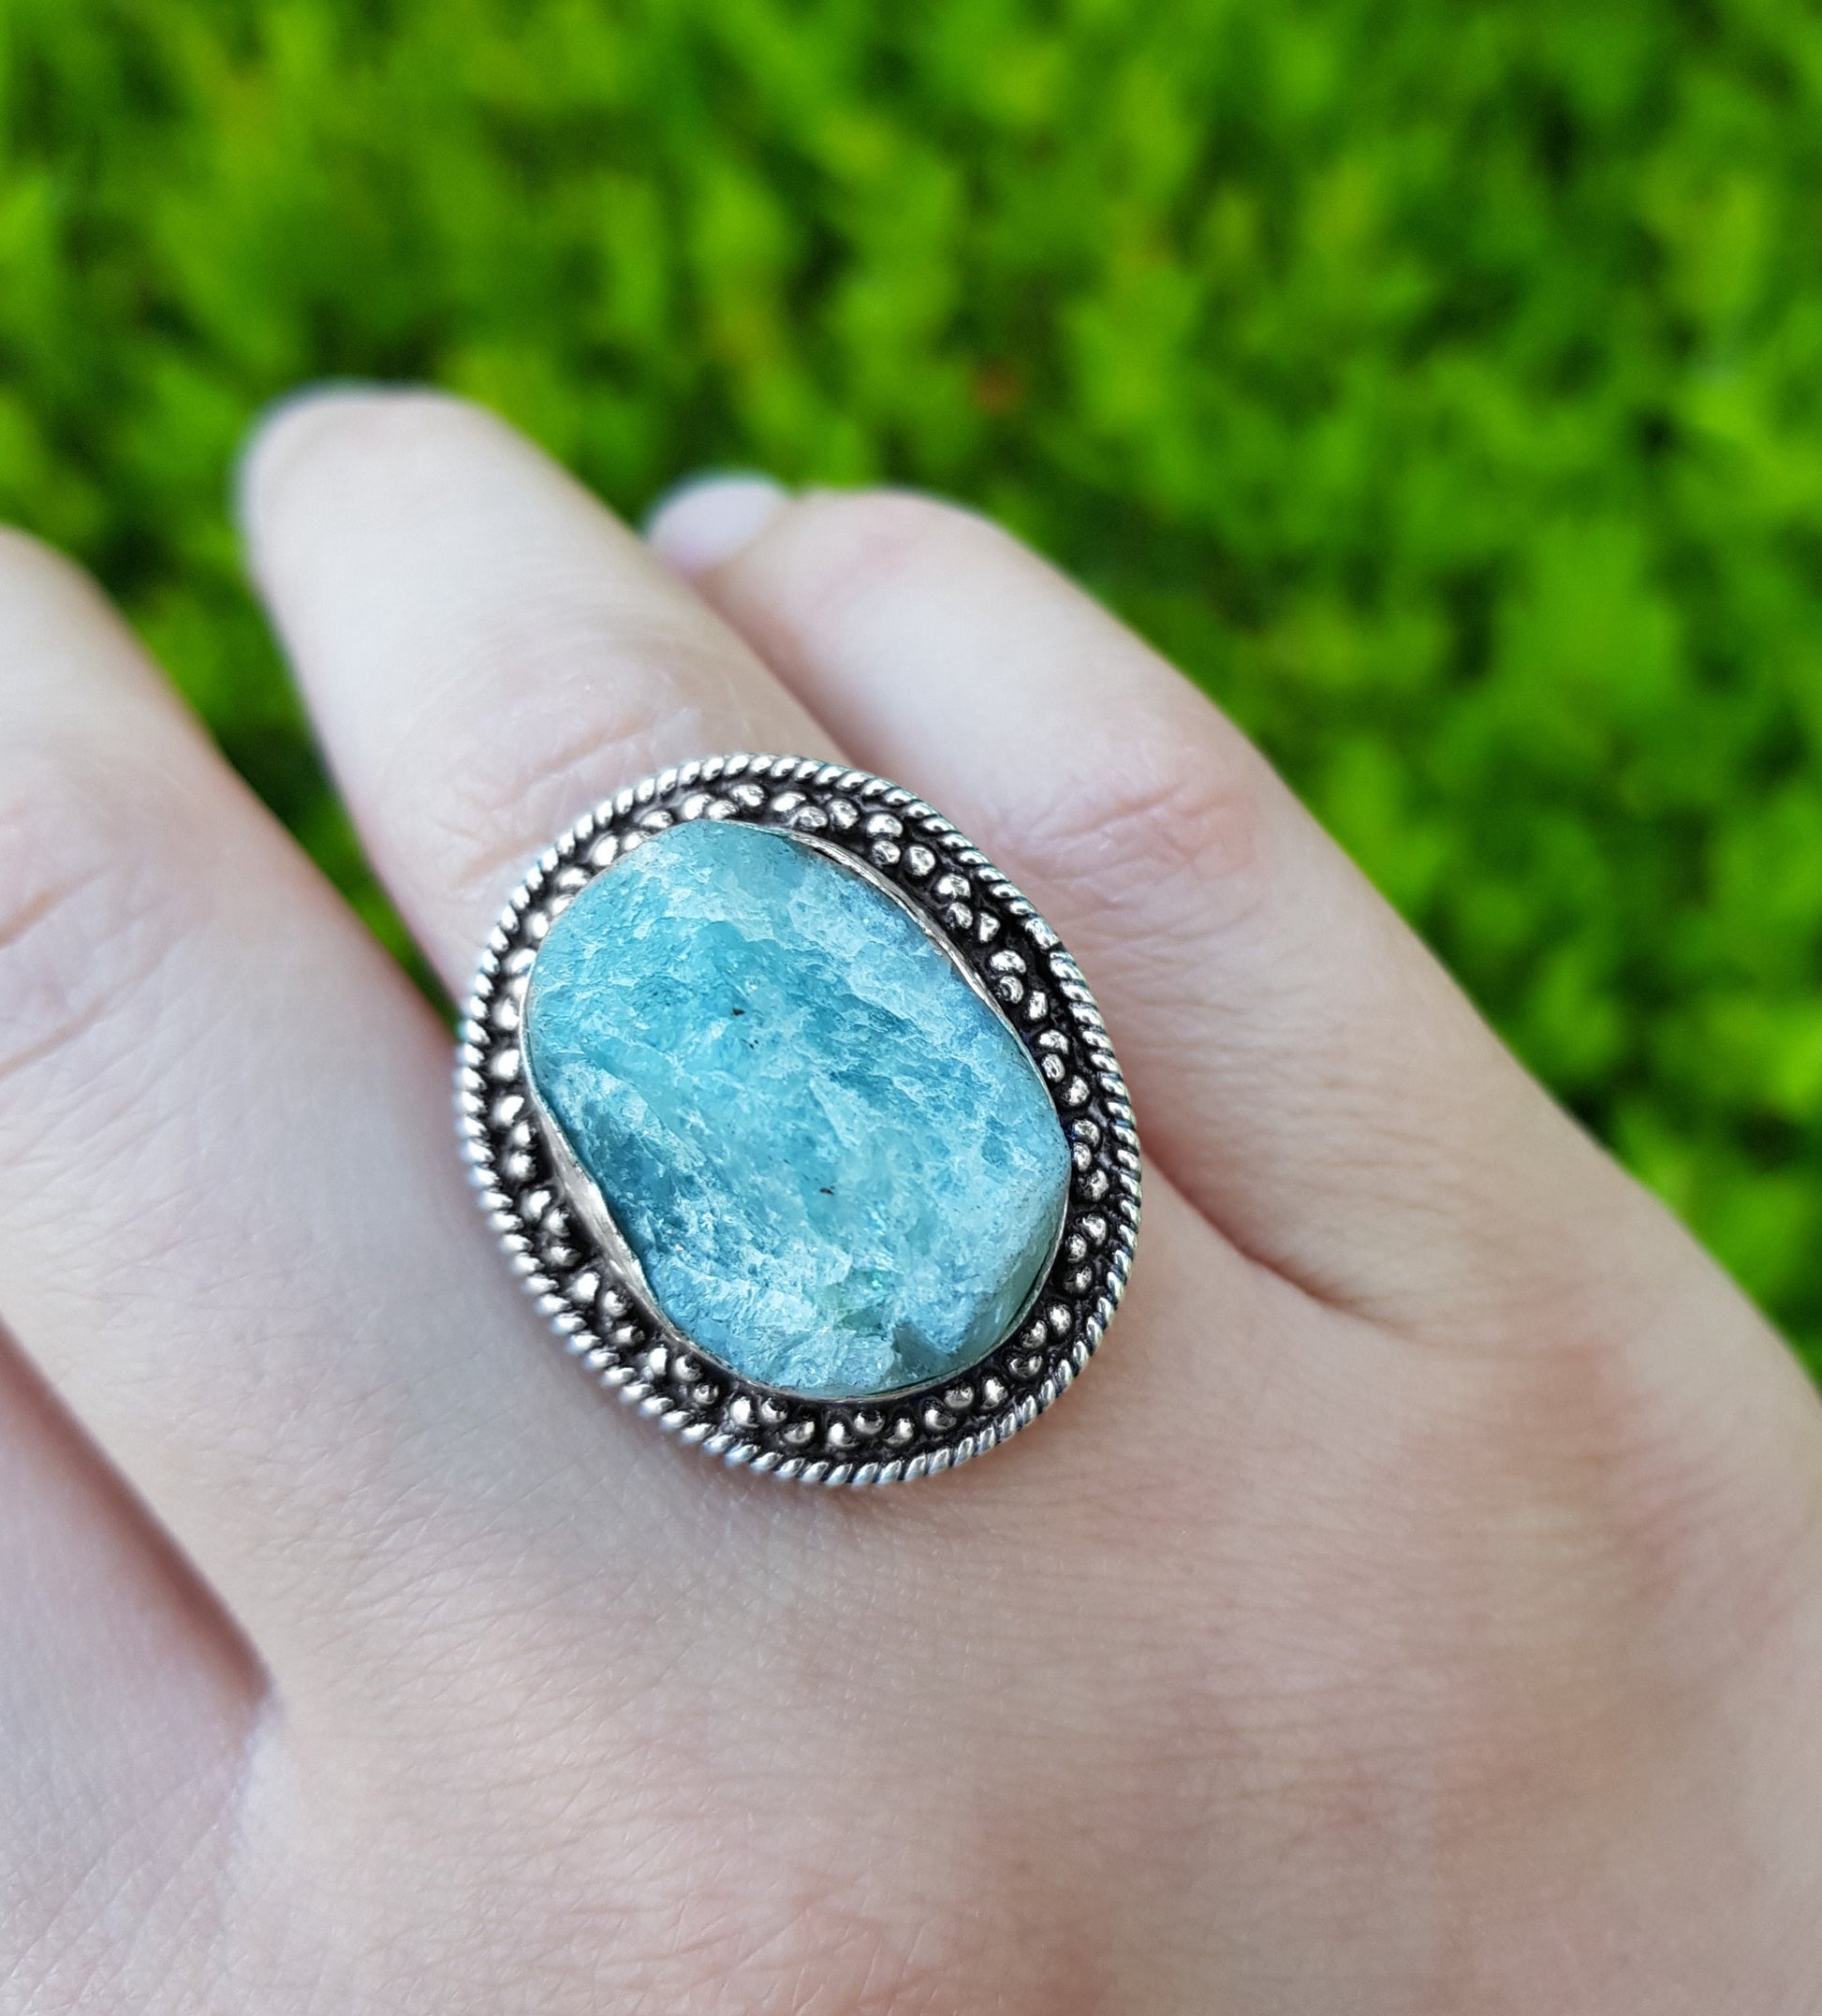 Blue Raw Apatite Ring In Sterling Silver Size US 7 3/4 Boho Crystal Ring Gemstone Ring Unique Gift For Women